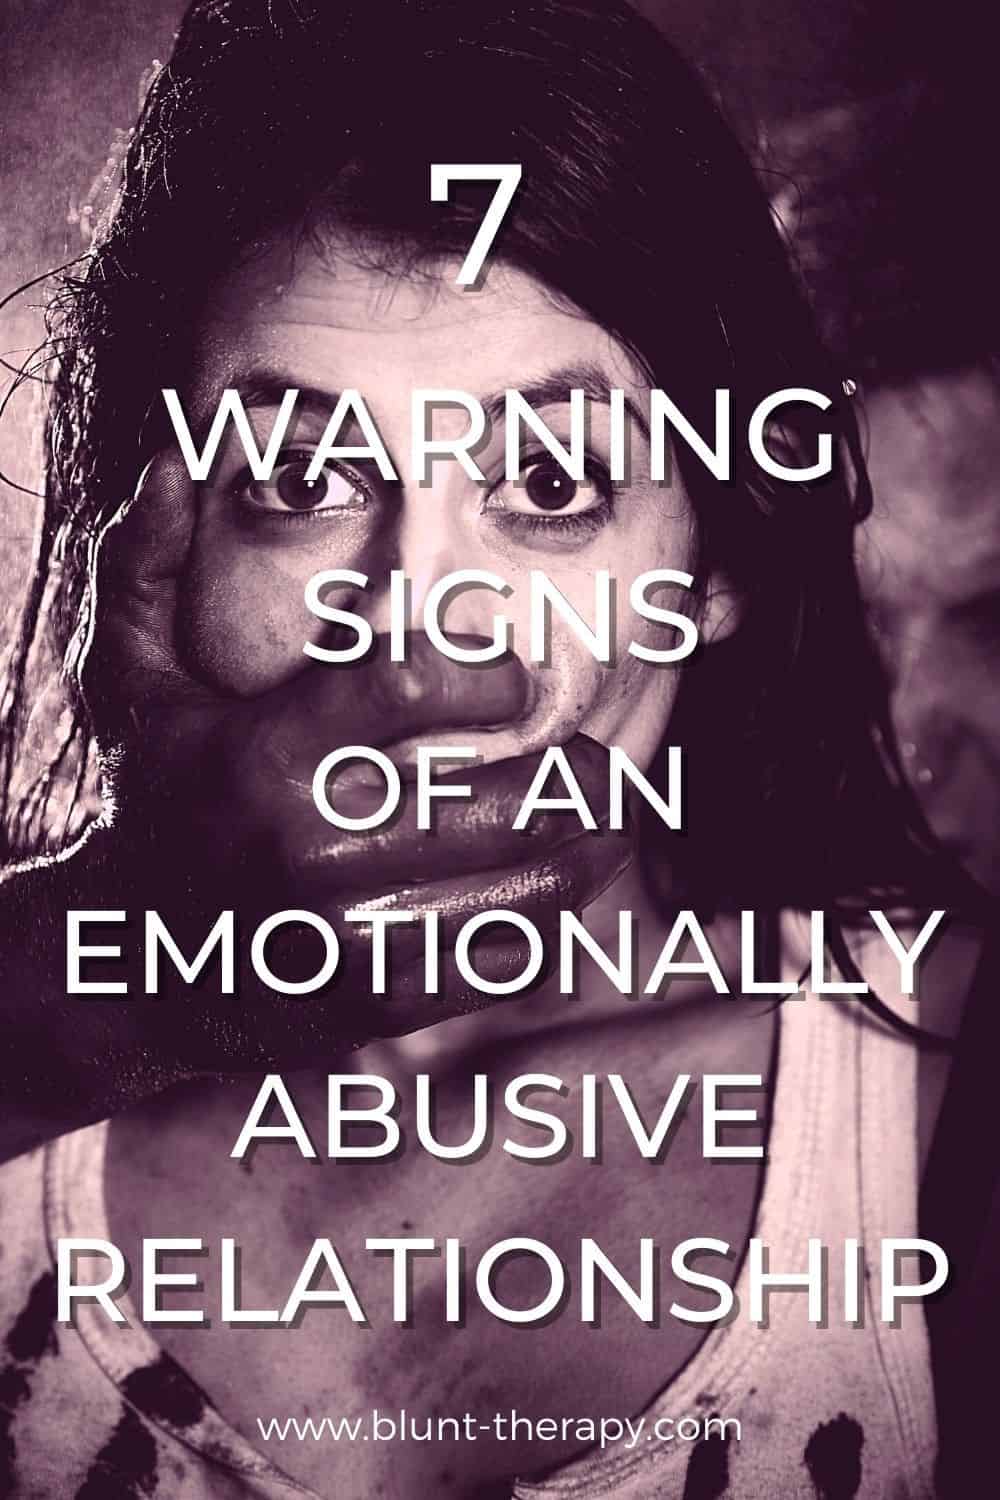 7 Warning Signs of An Emotionally Abusive Relationship